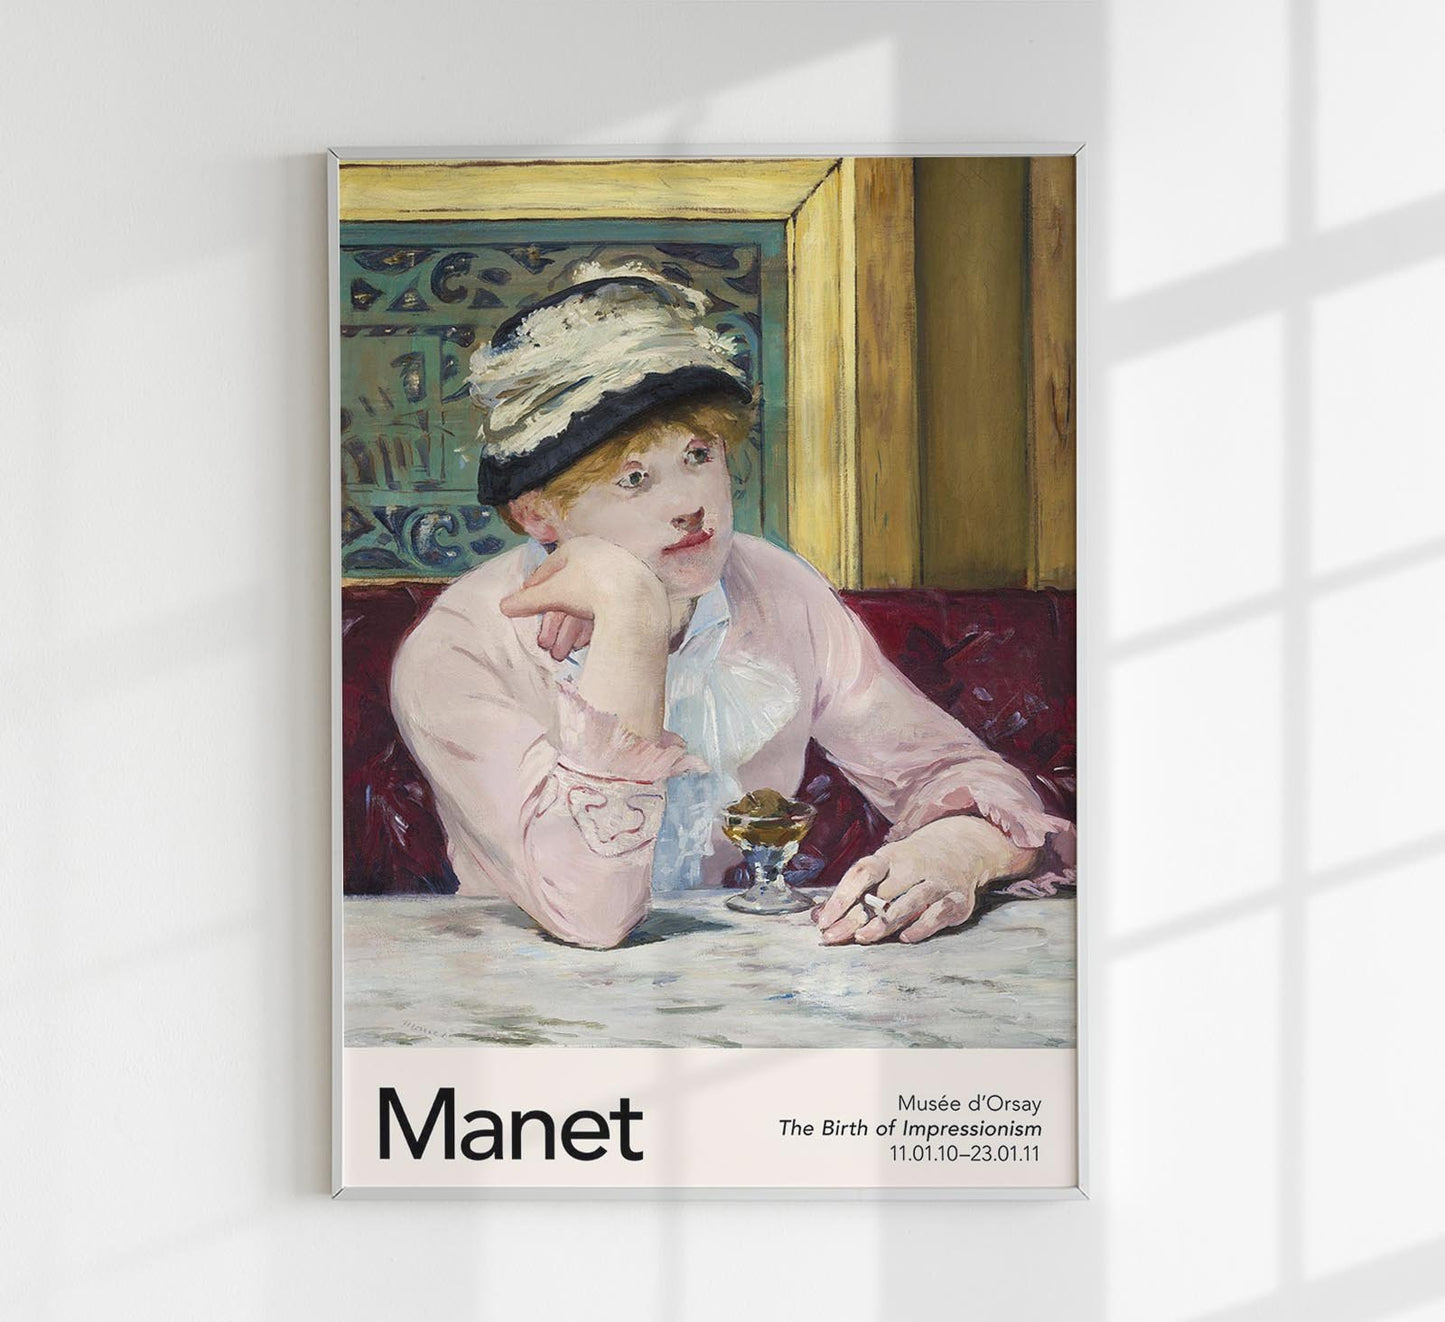 Plum Brandy by Manet Exhibition Poster